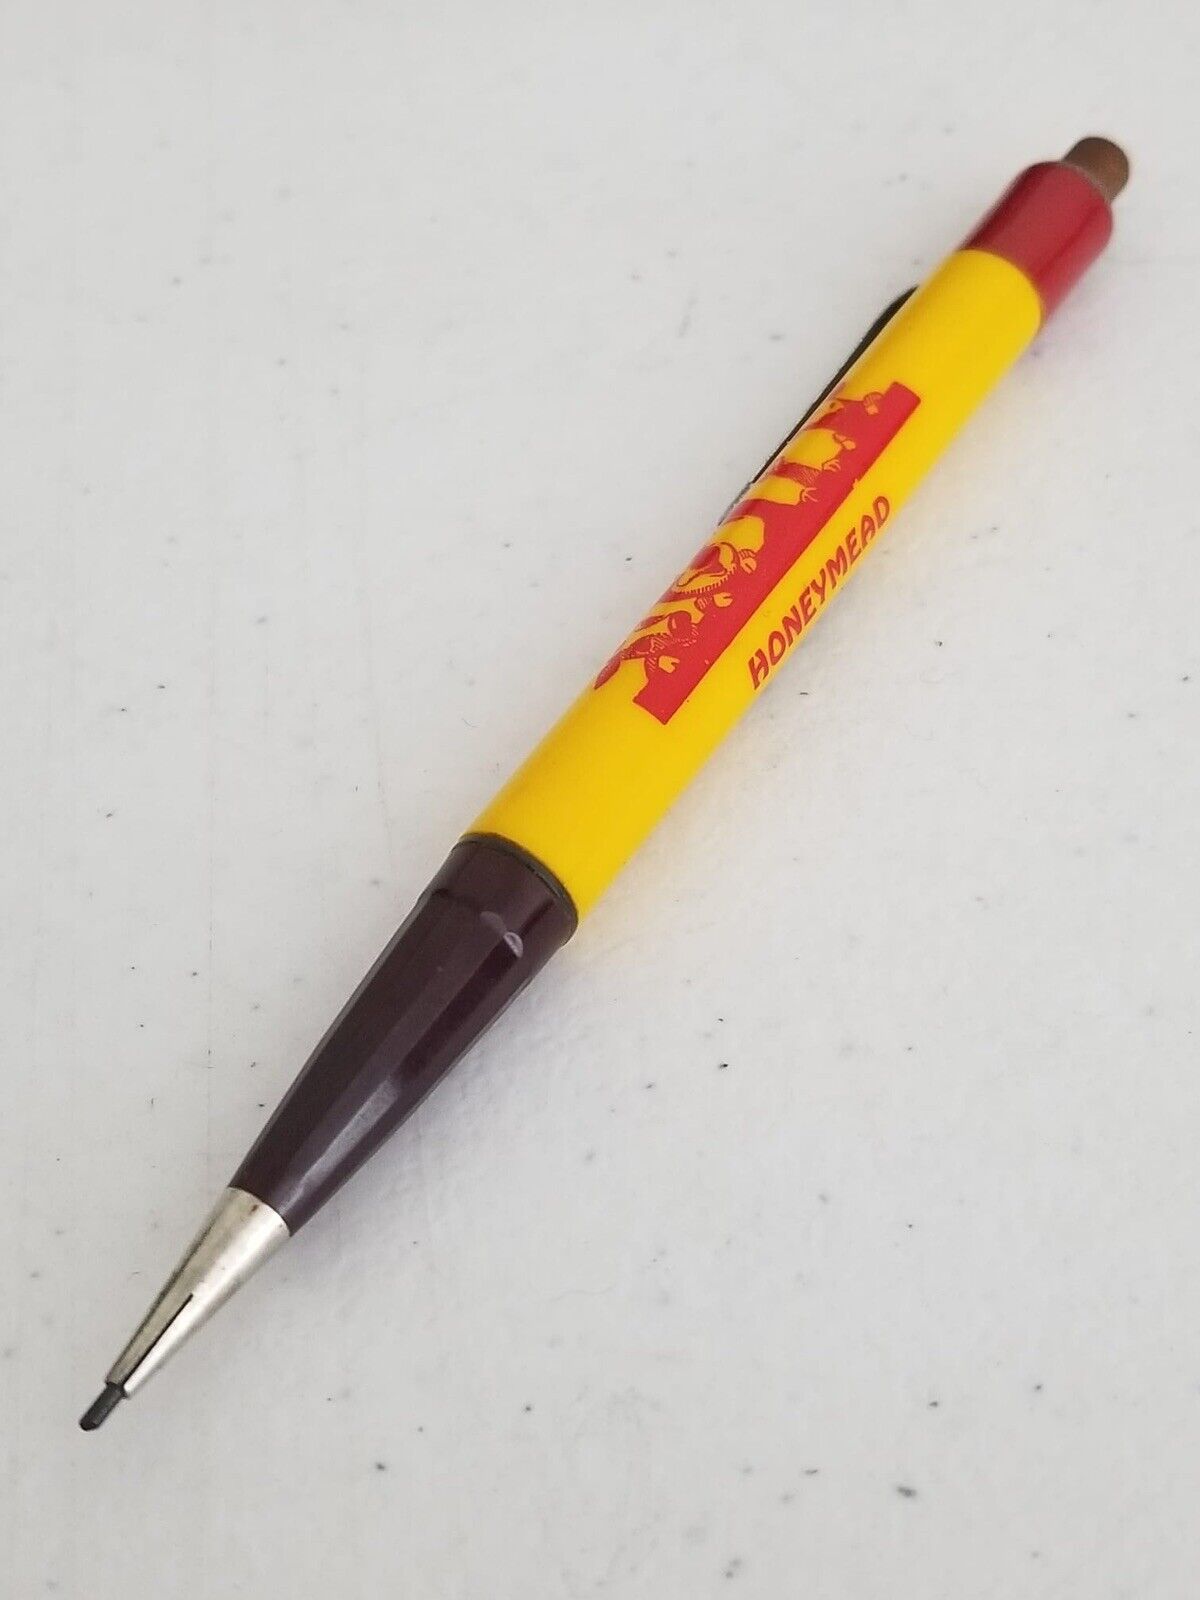 Vintage Ritepoint Mechanical Pencil Co-op Creamery Assn Collectible Writing Tool